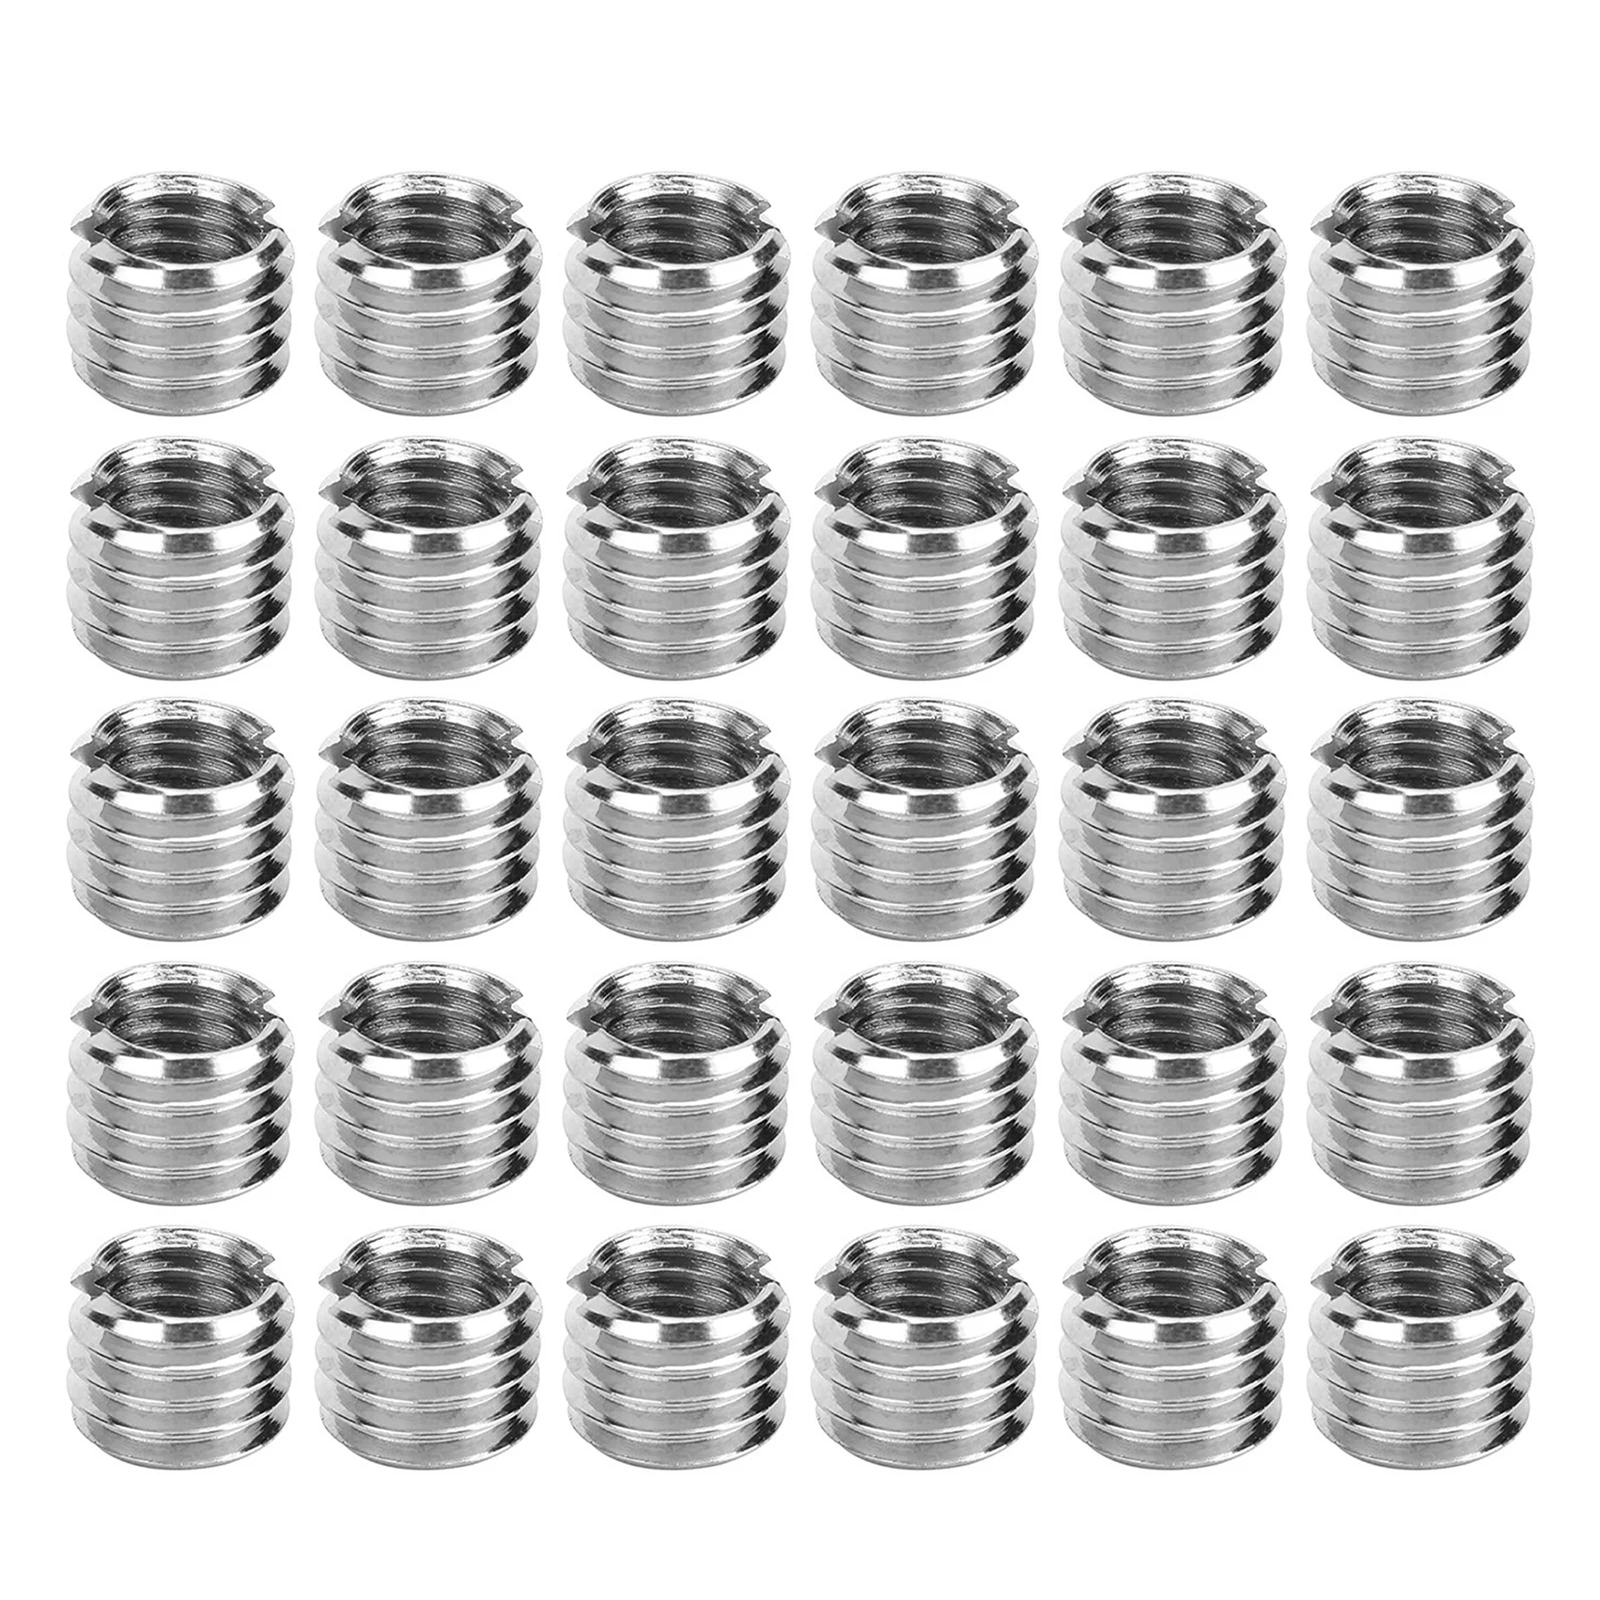 

Affordable and Efficient Thread Repair Solution 30 Threaded Inserts for M6X1 0 Inner and M8X1 25 Outer Threads